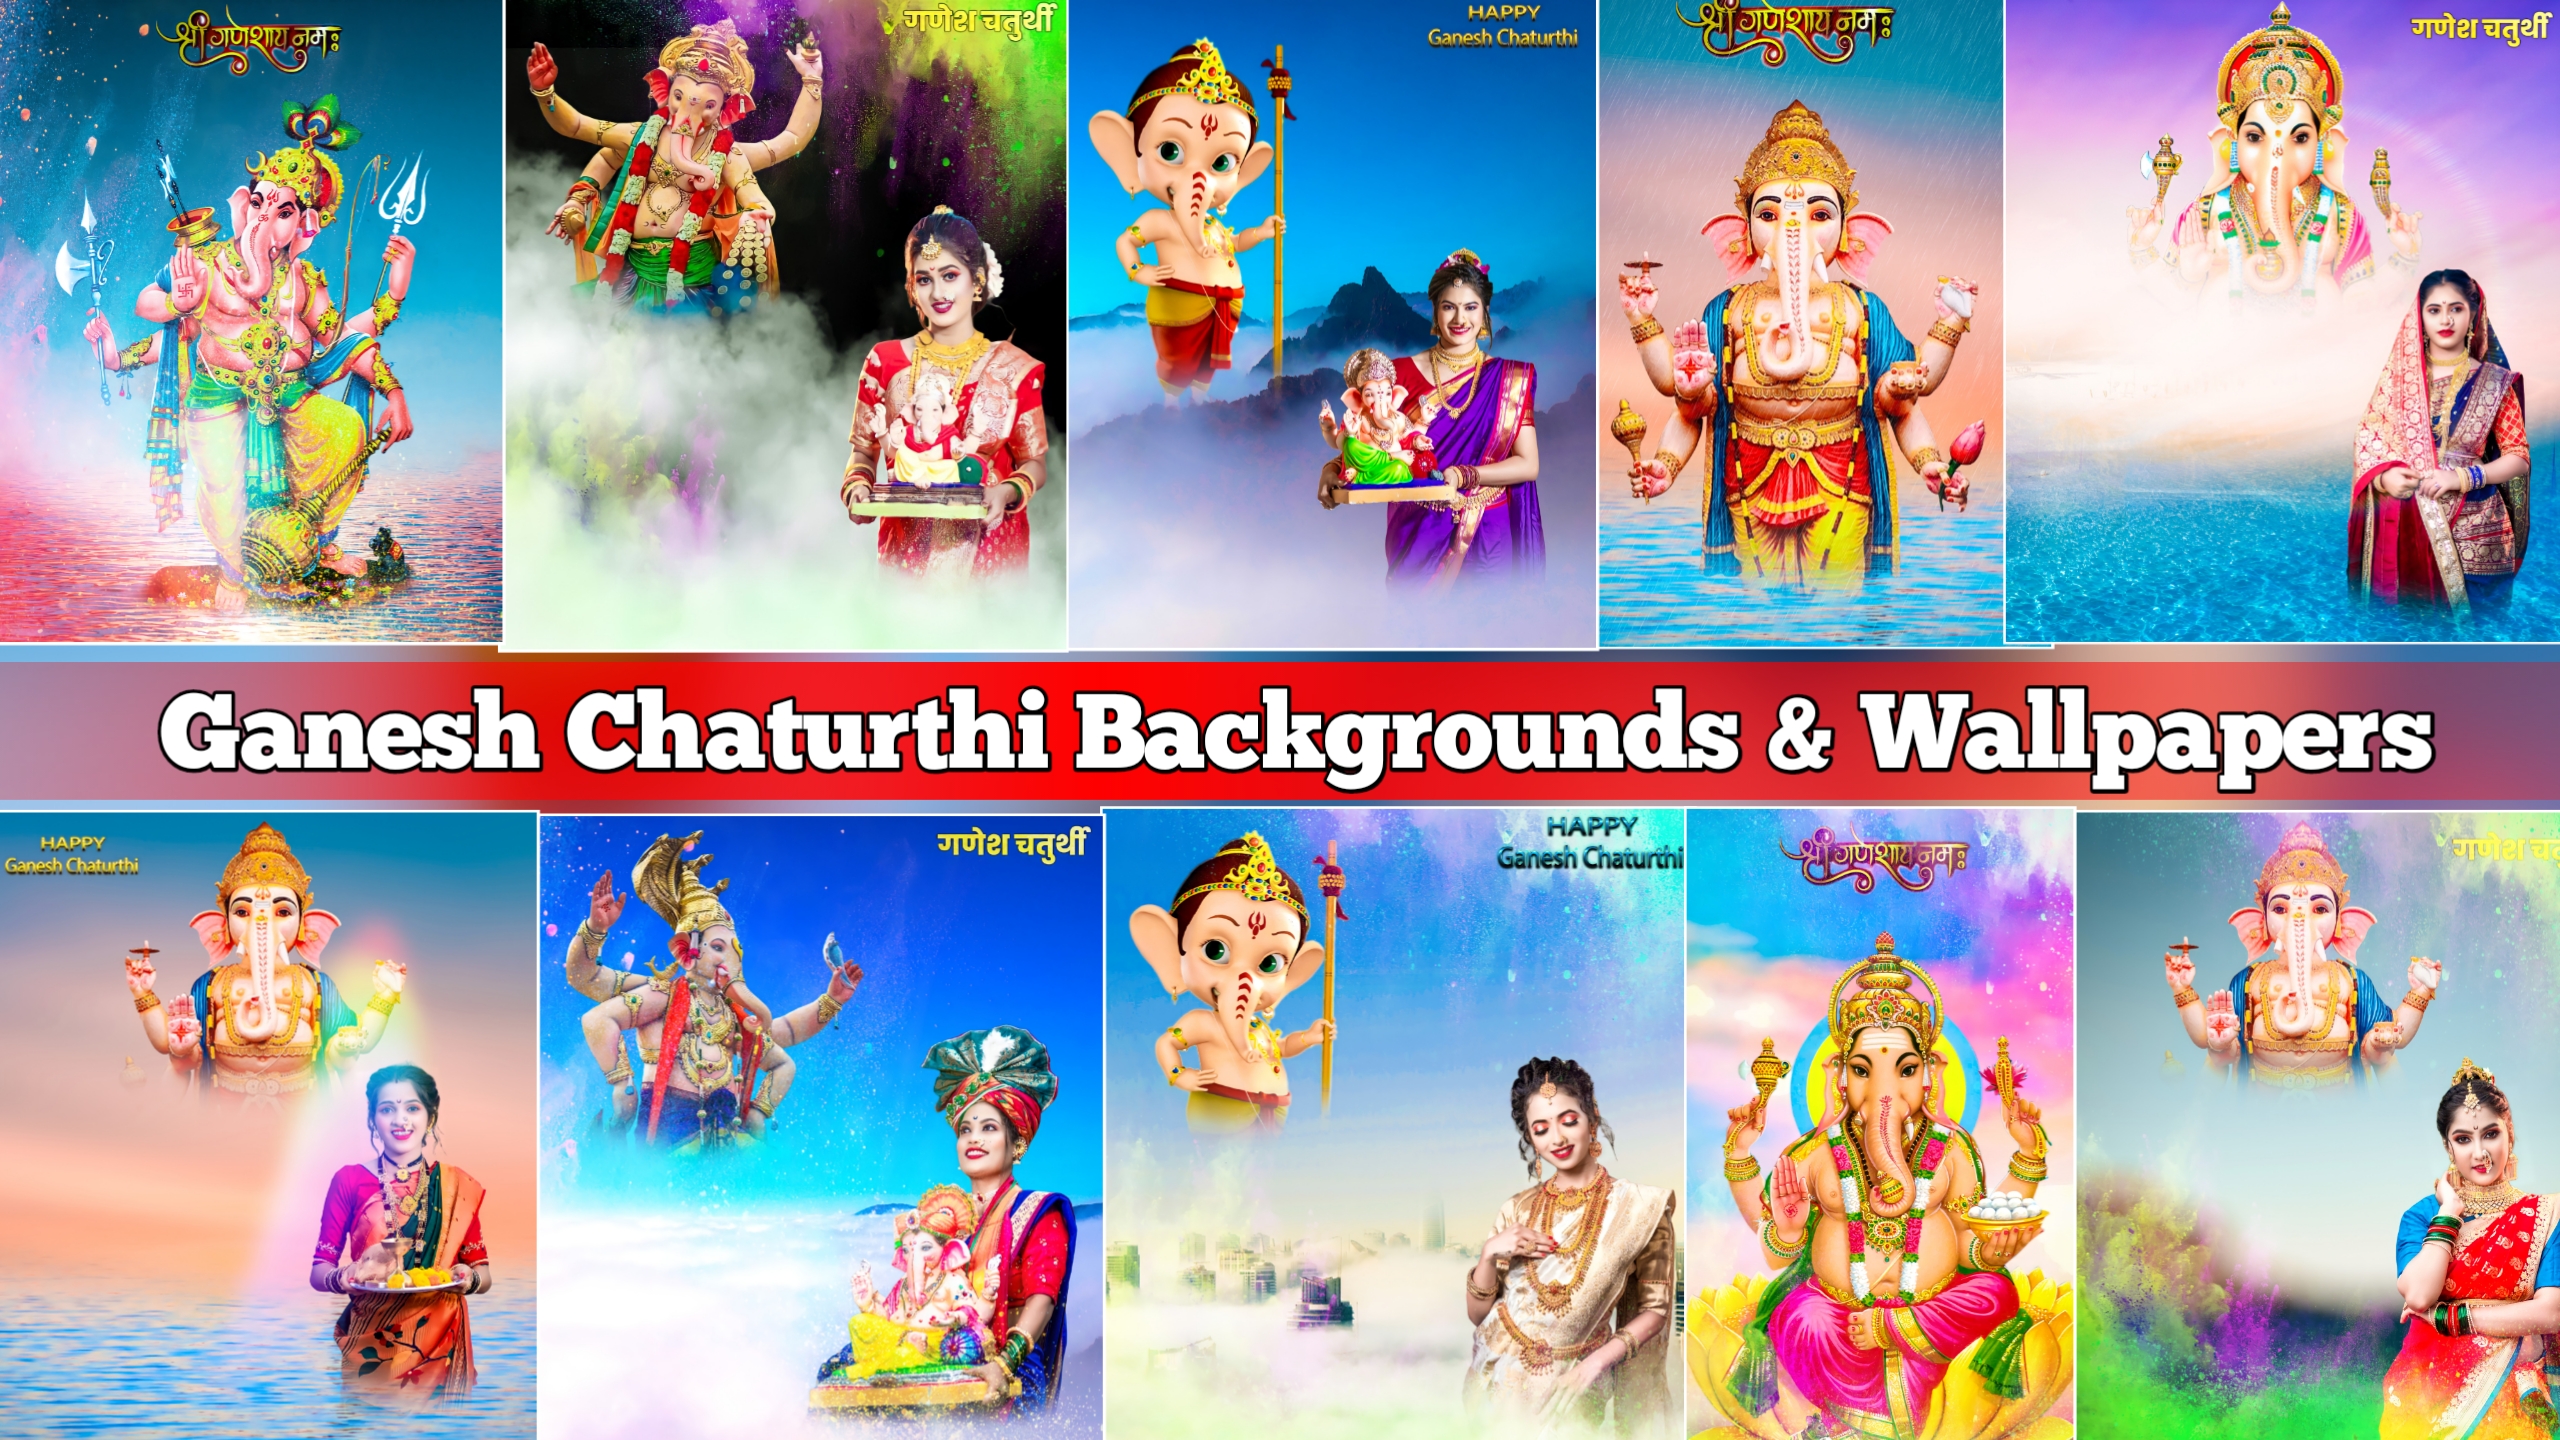 Ganesh Chaturthi Background And Wallpaper Images